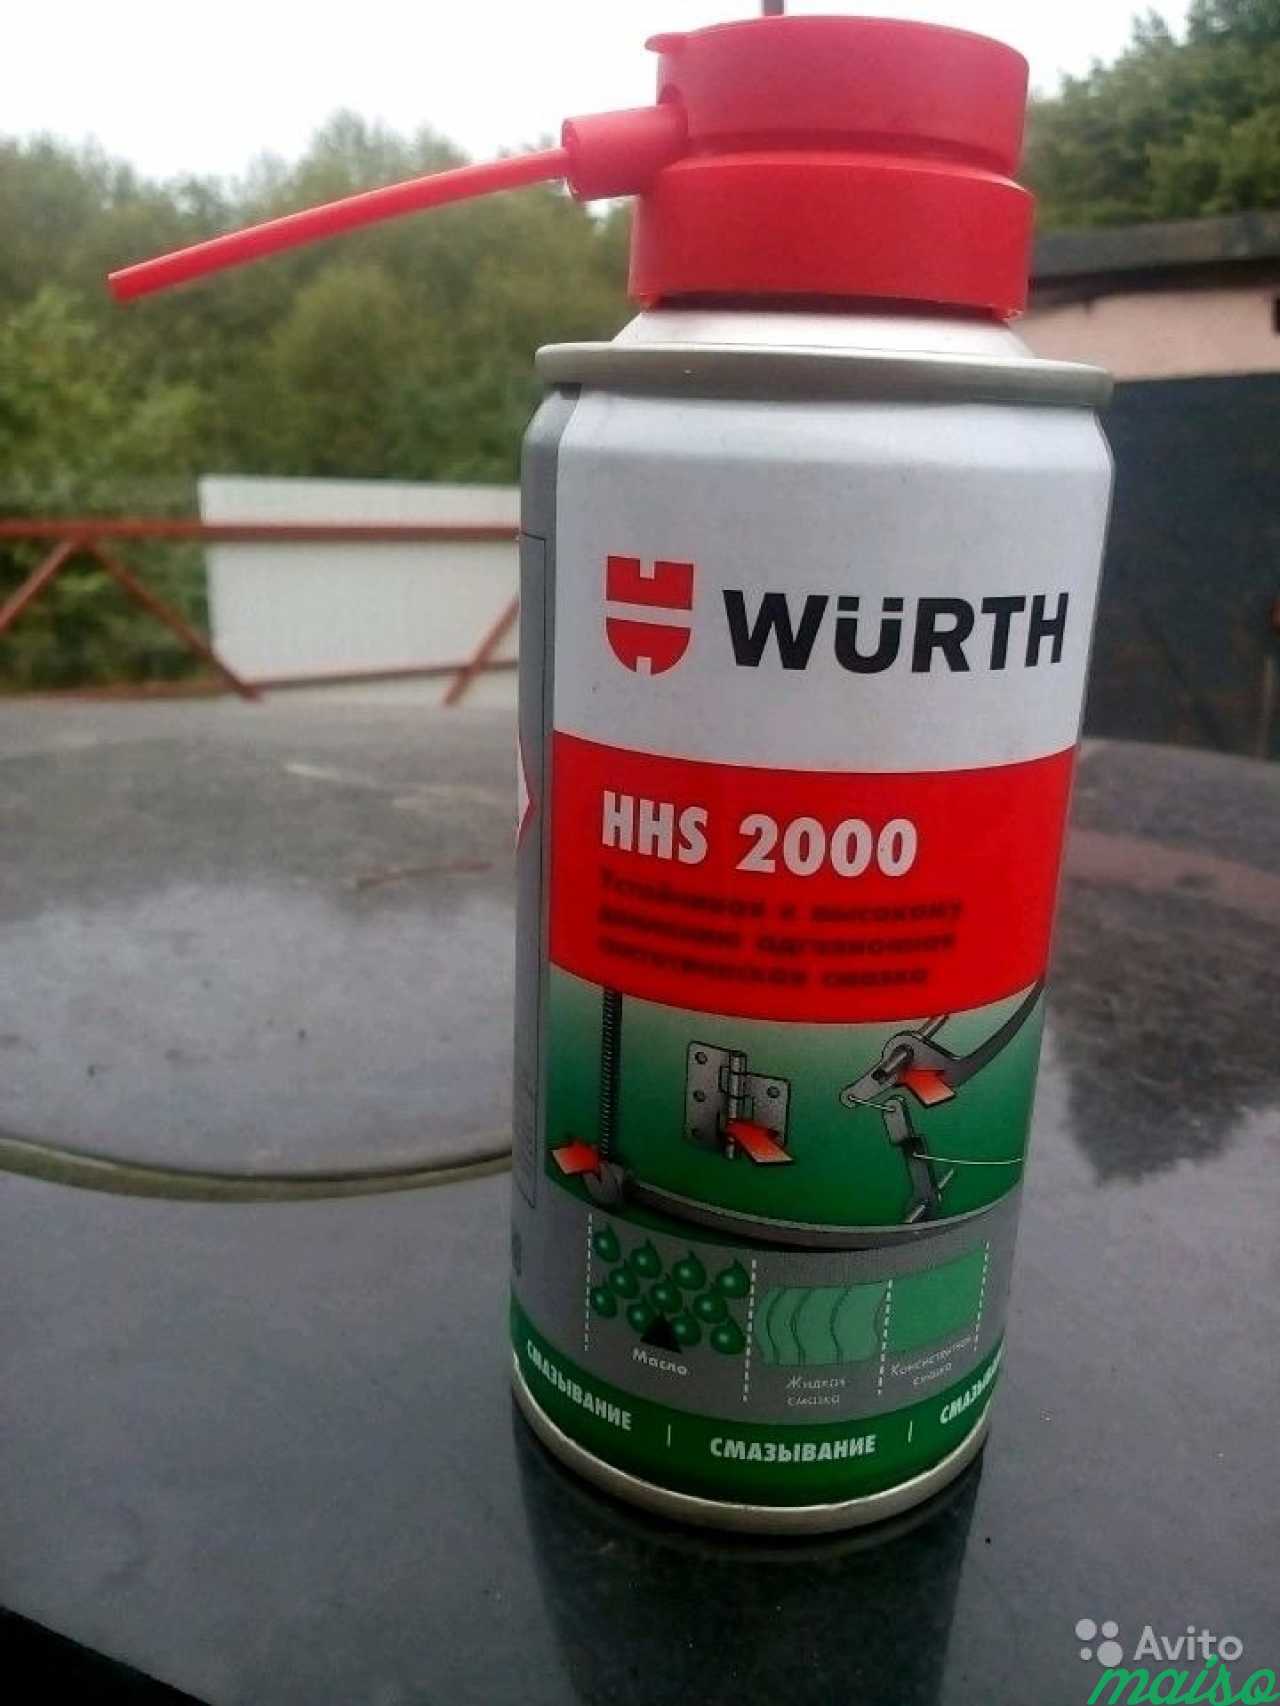 Wurth hhs 2000. Смазка Wurth HHS 2000 150мл. Вюрт 2000 смазка спрей. Wurth спрей  смазка ннs2000 150 мл. Спрей смазка hhs2000 150мл.